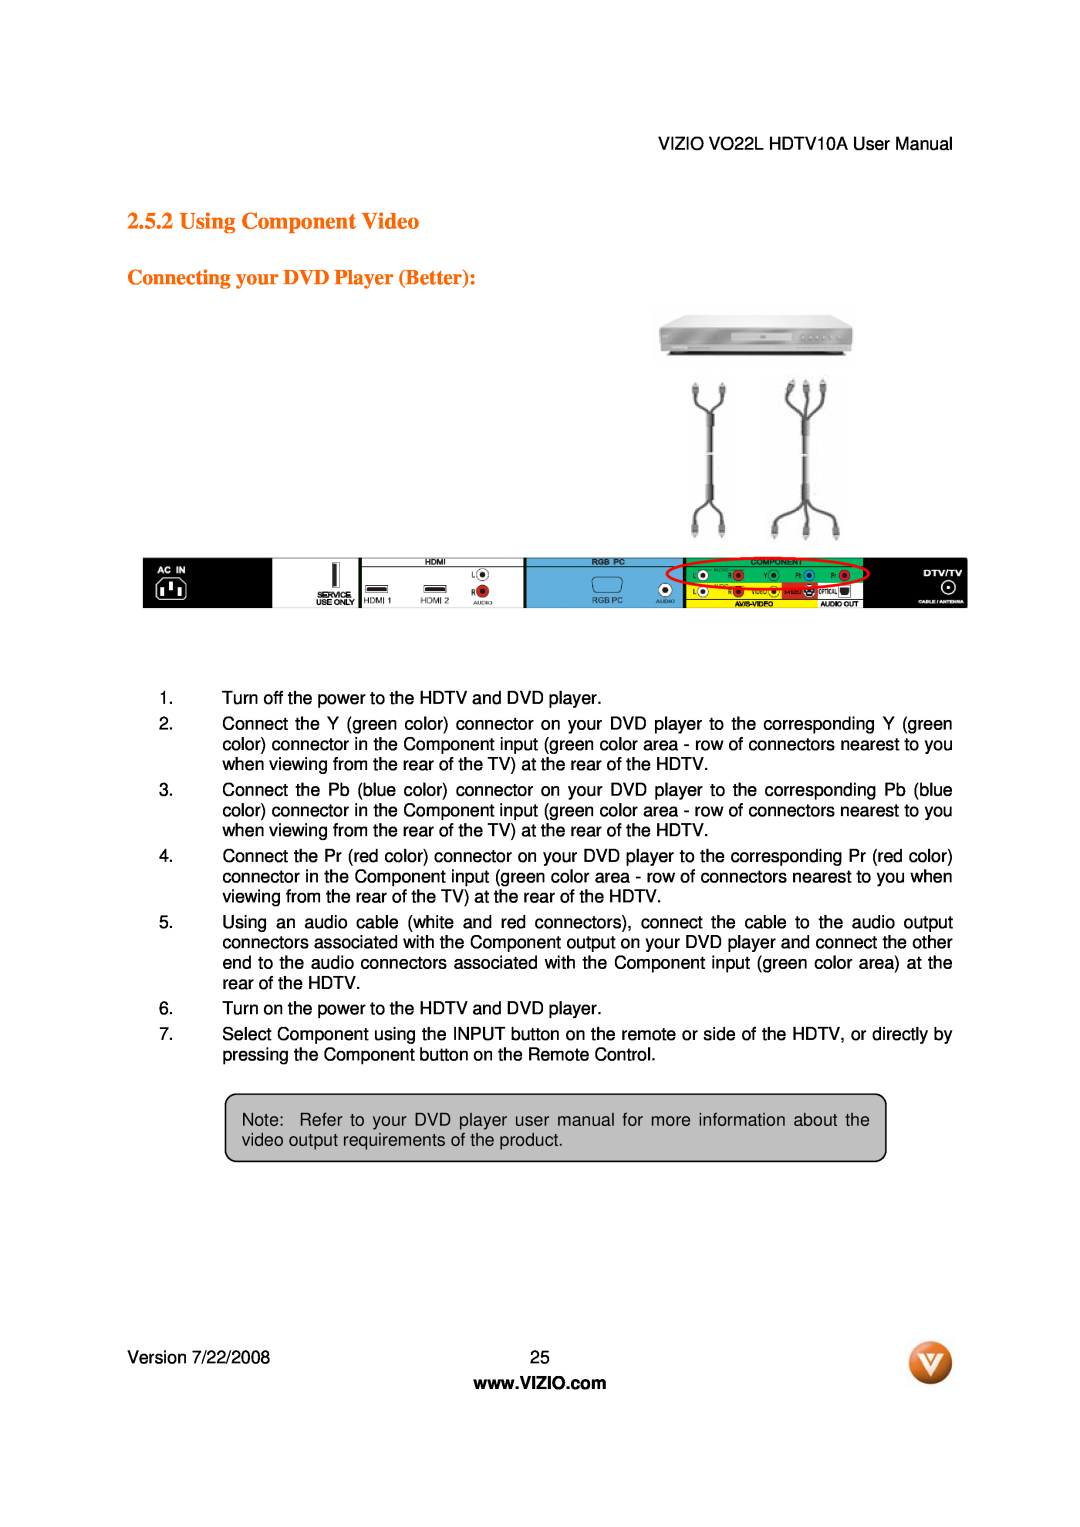 Vizio VO22L user manual Using Component Video, Connecting your DVD Player Better 